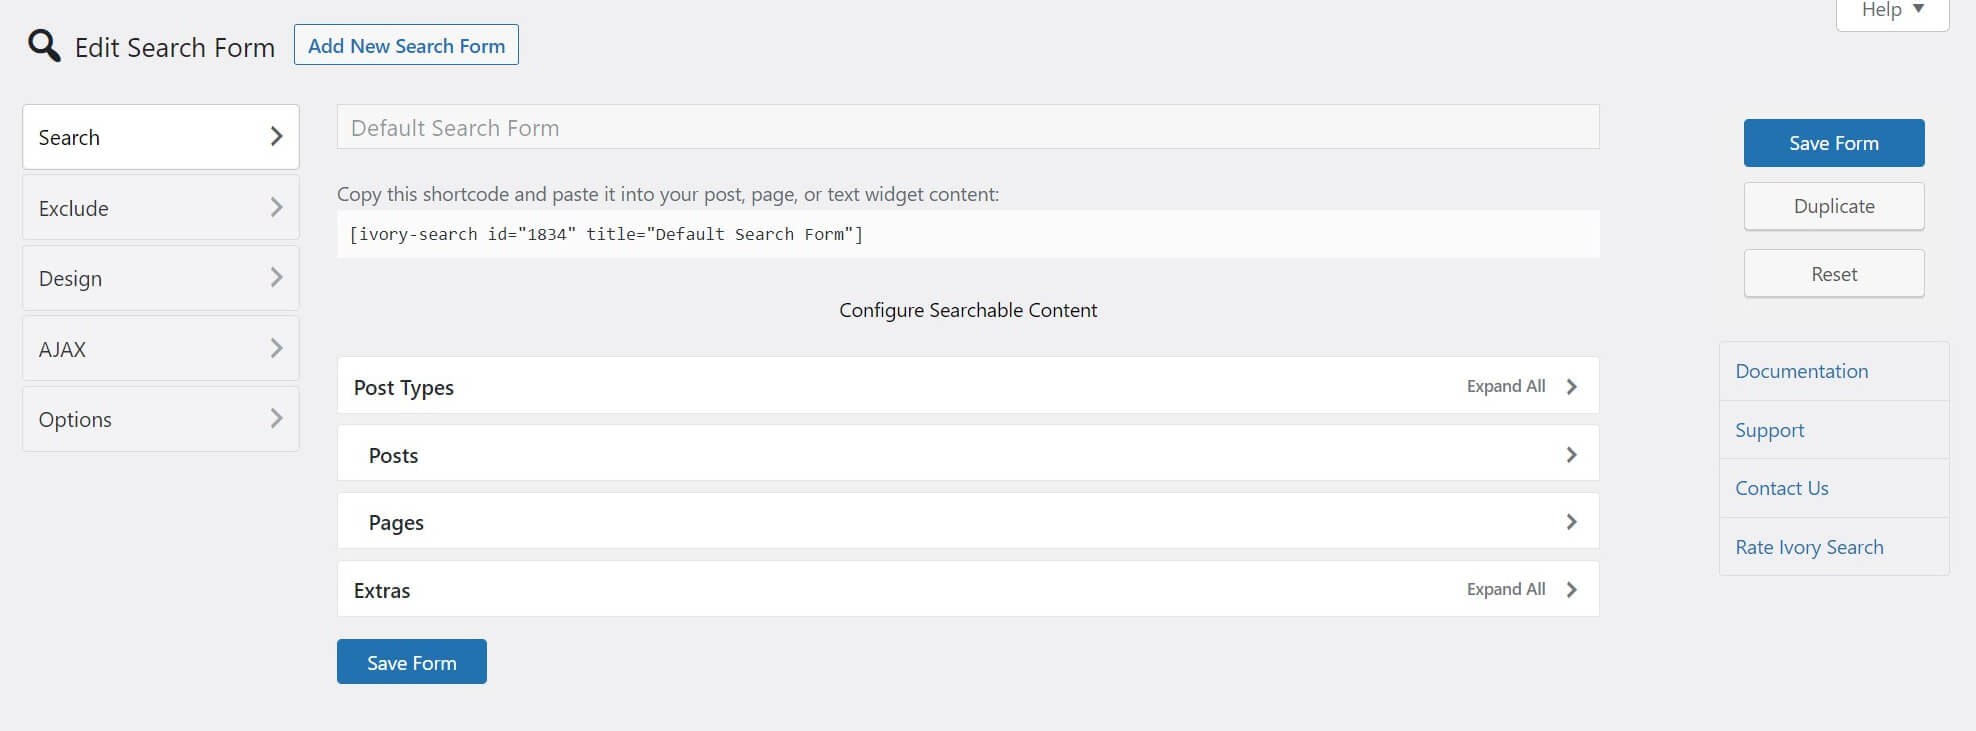 Adding a new search form in Ivory Search.